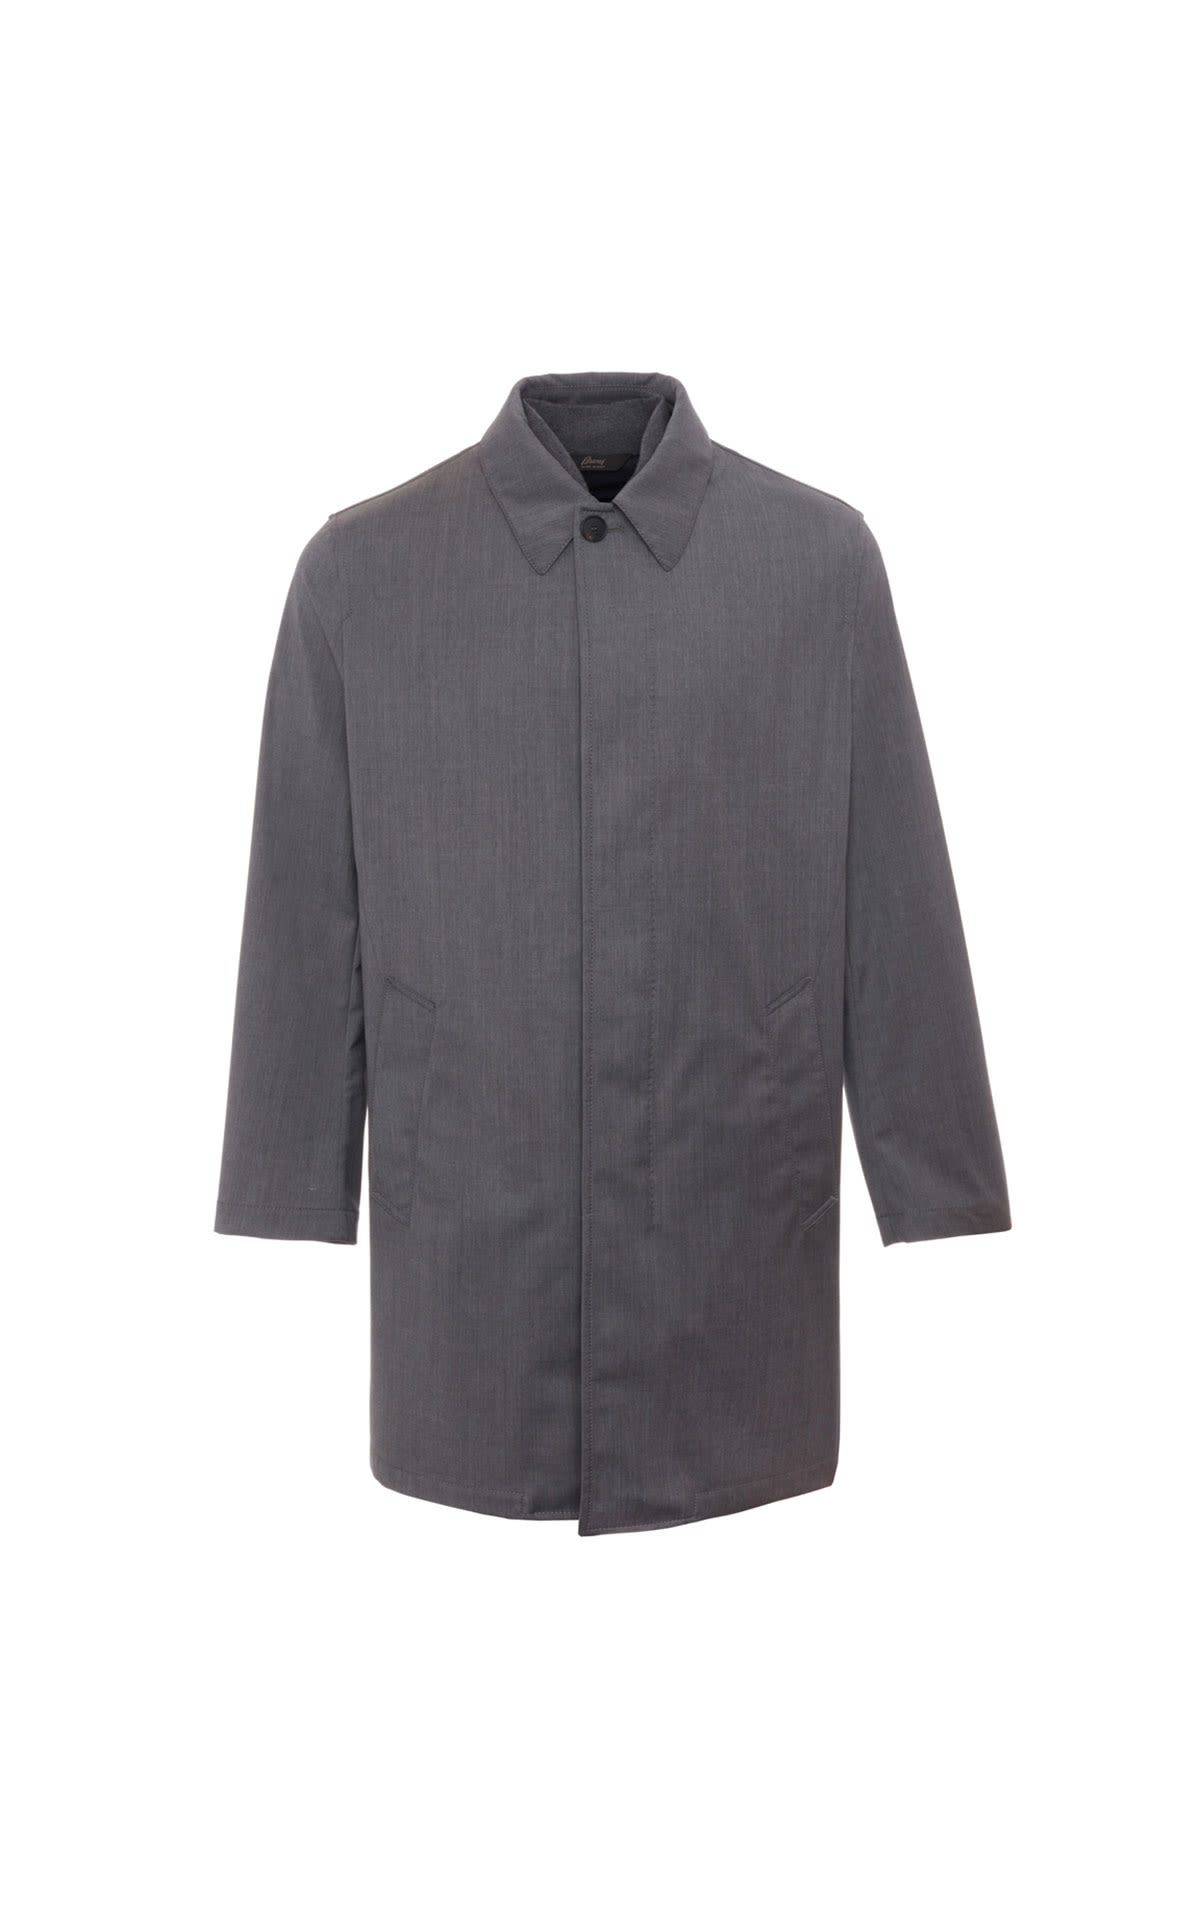 Brioni Car coat with detachable vest from Bicester Village